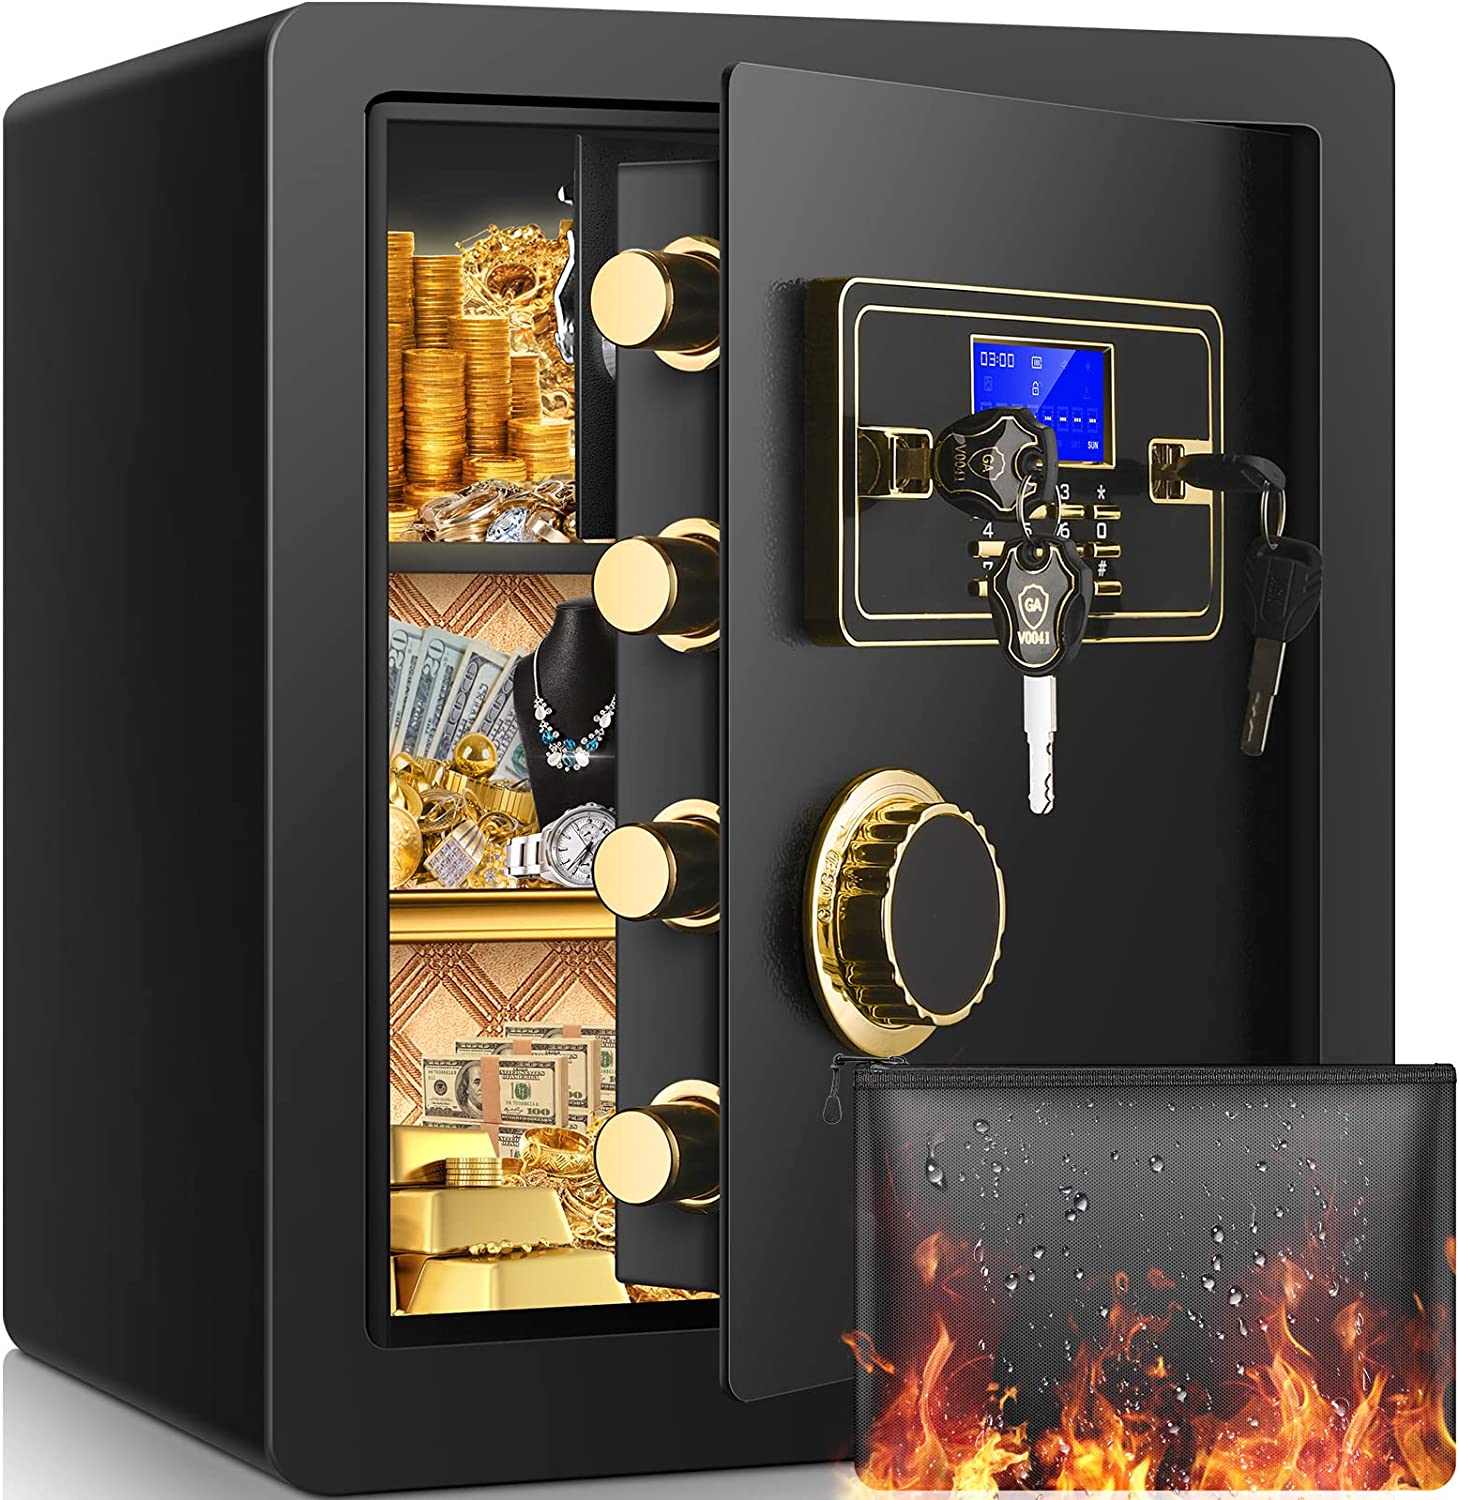 2.12 Cub Fireproof Waterproof, Security Home Safe with [...]